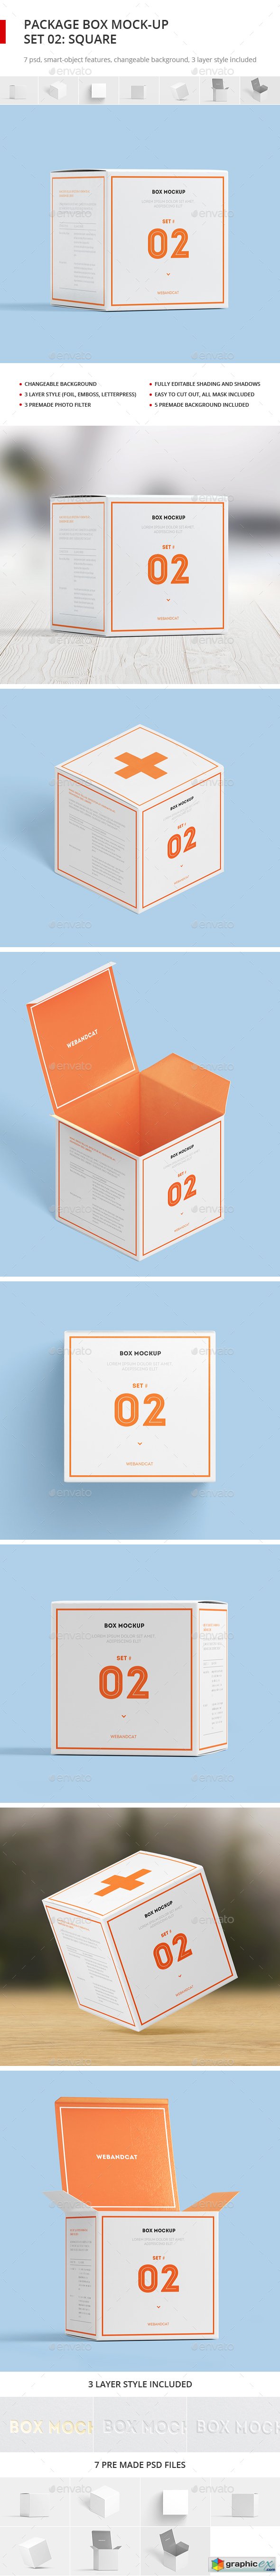 Package Box Mock-up, Set 2: Square Box